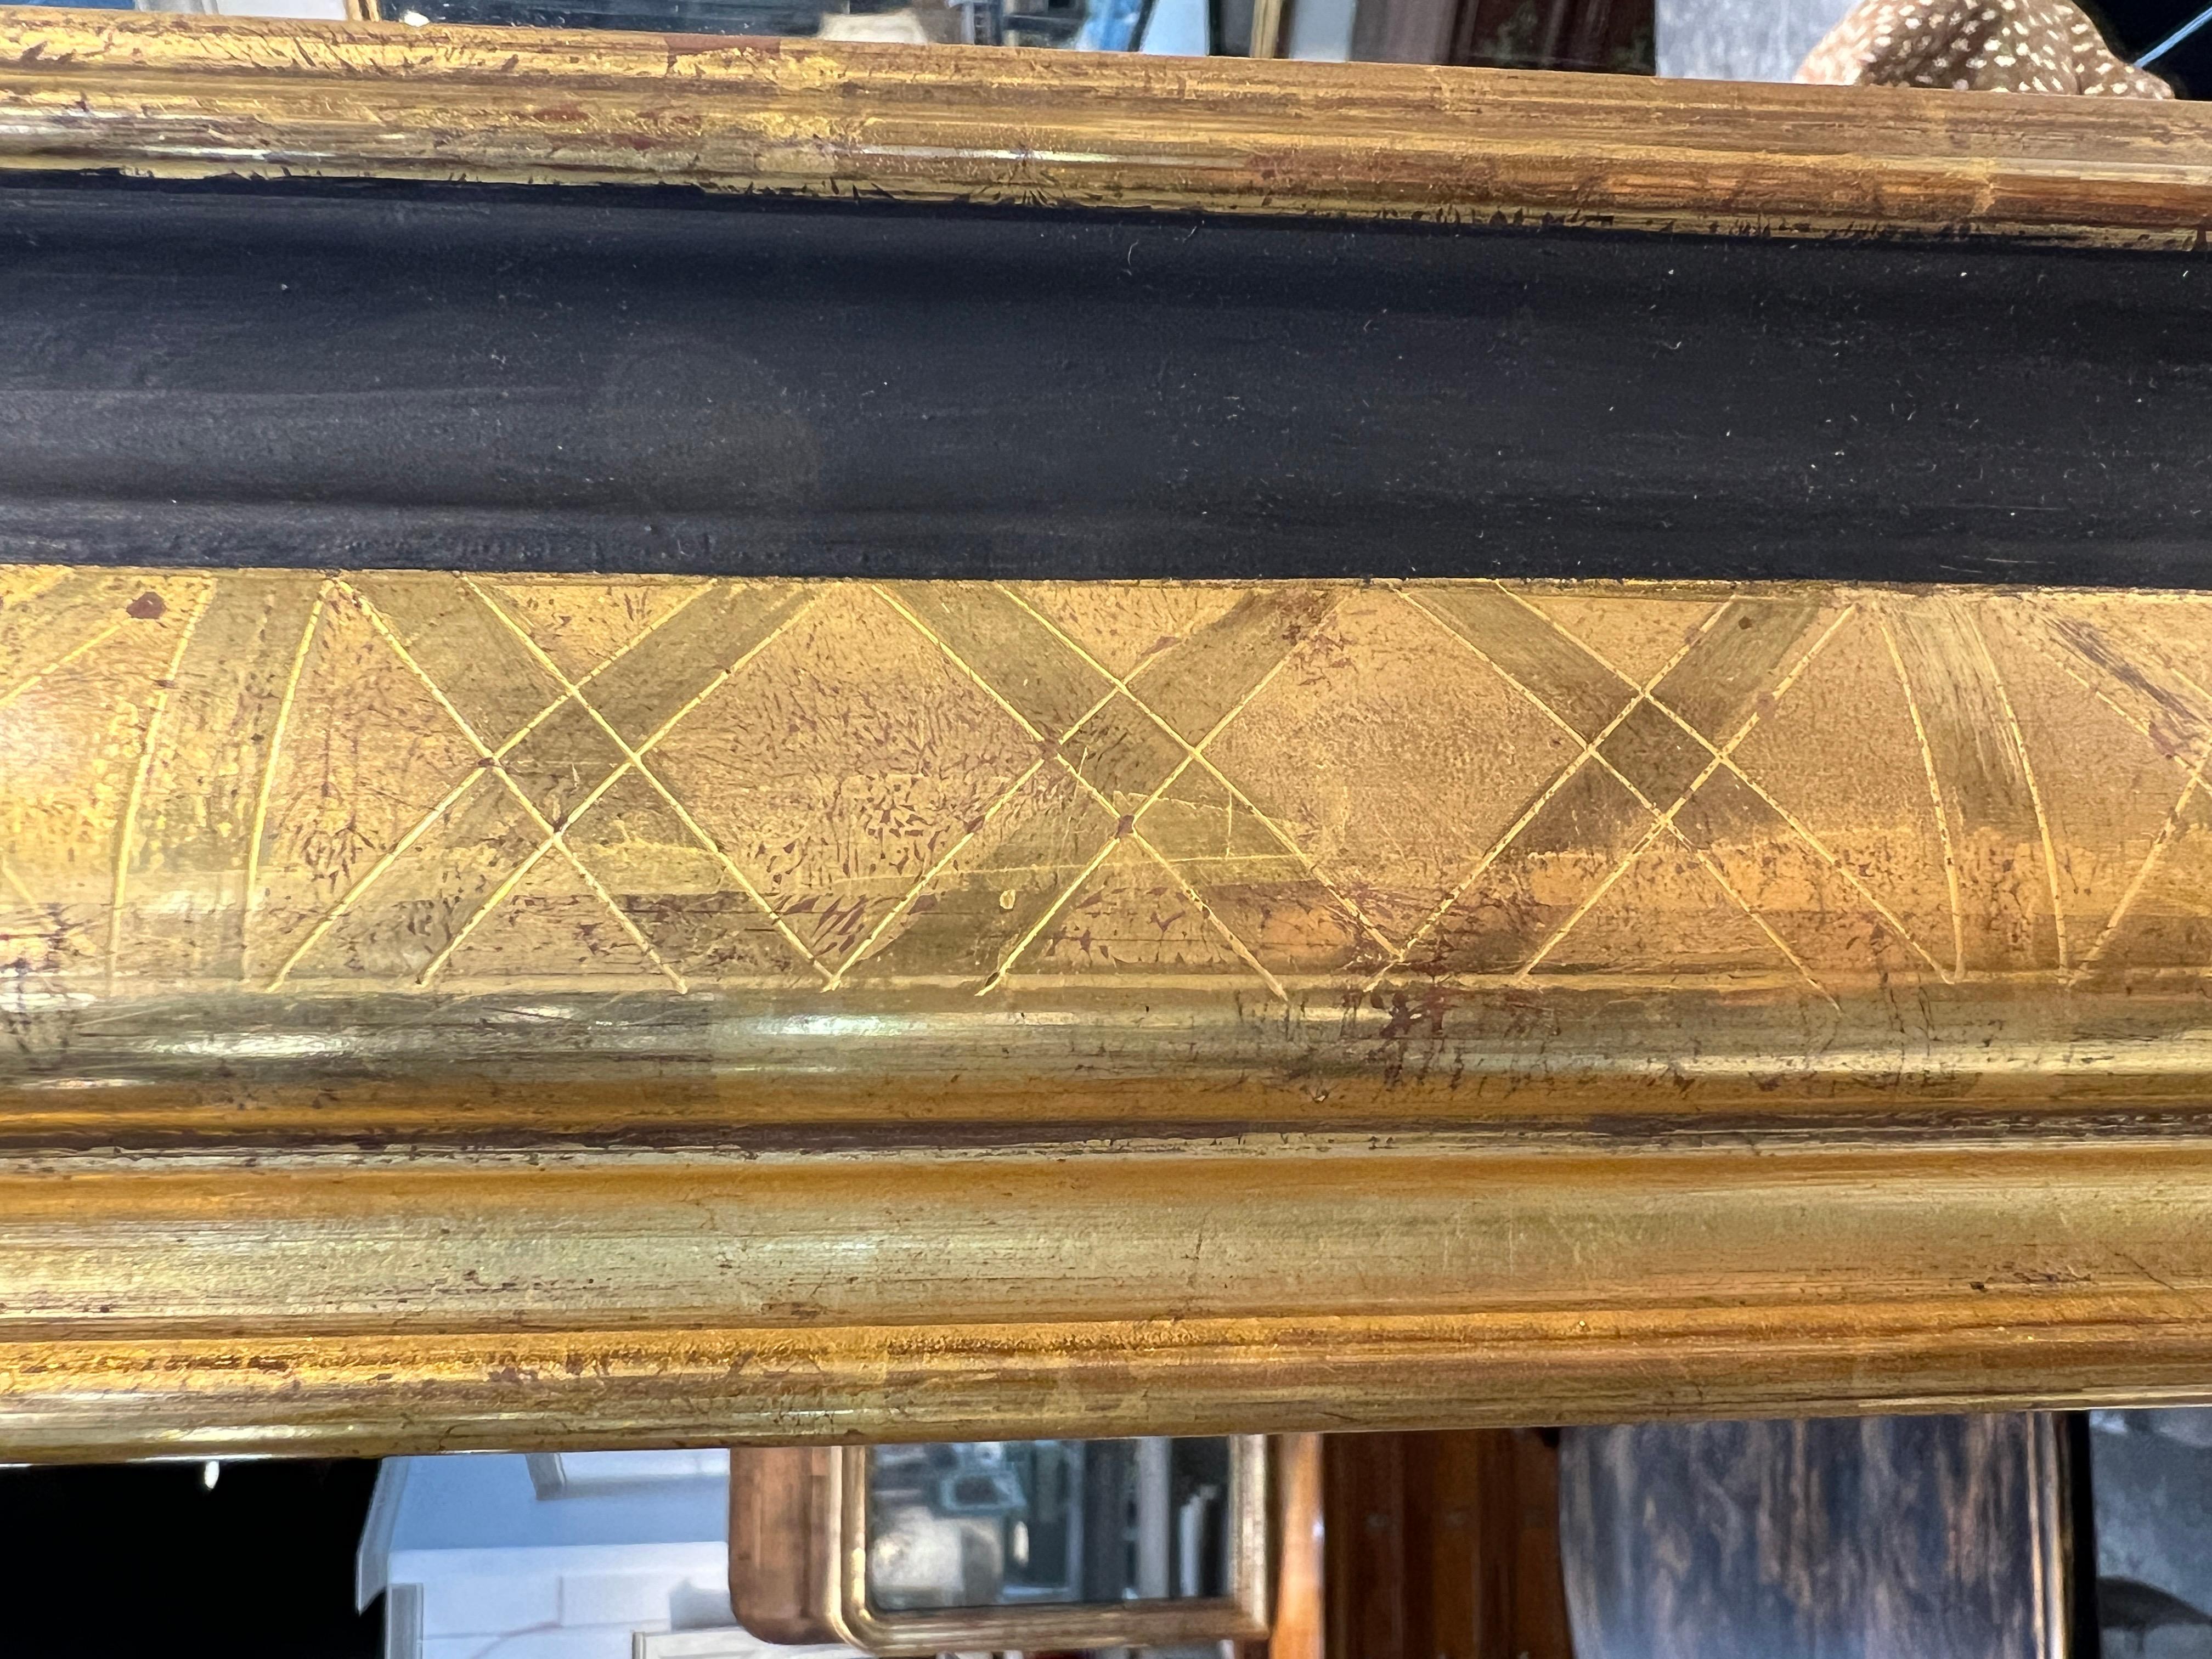 Handsome large pair of French Louis Philippe style mirrors, etched gold gilt on old wood frames accented with a painted black band.

Frame and backing of old wood, expertly applied gold gilt on etched frame.

Frames are intentionally made to appear